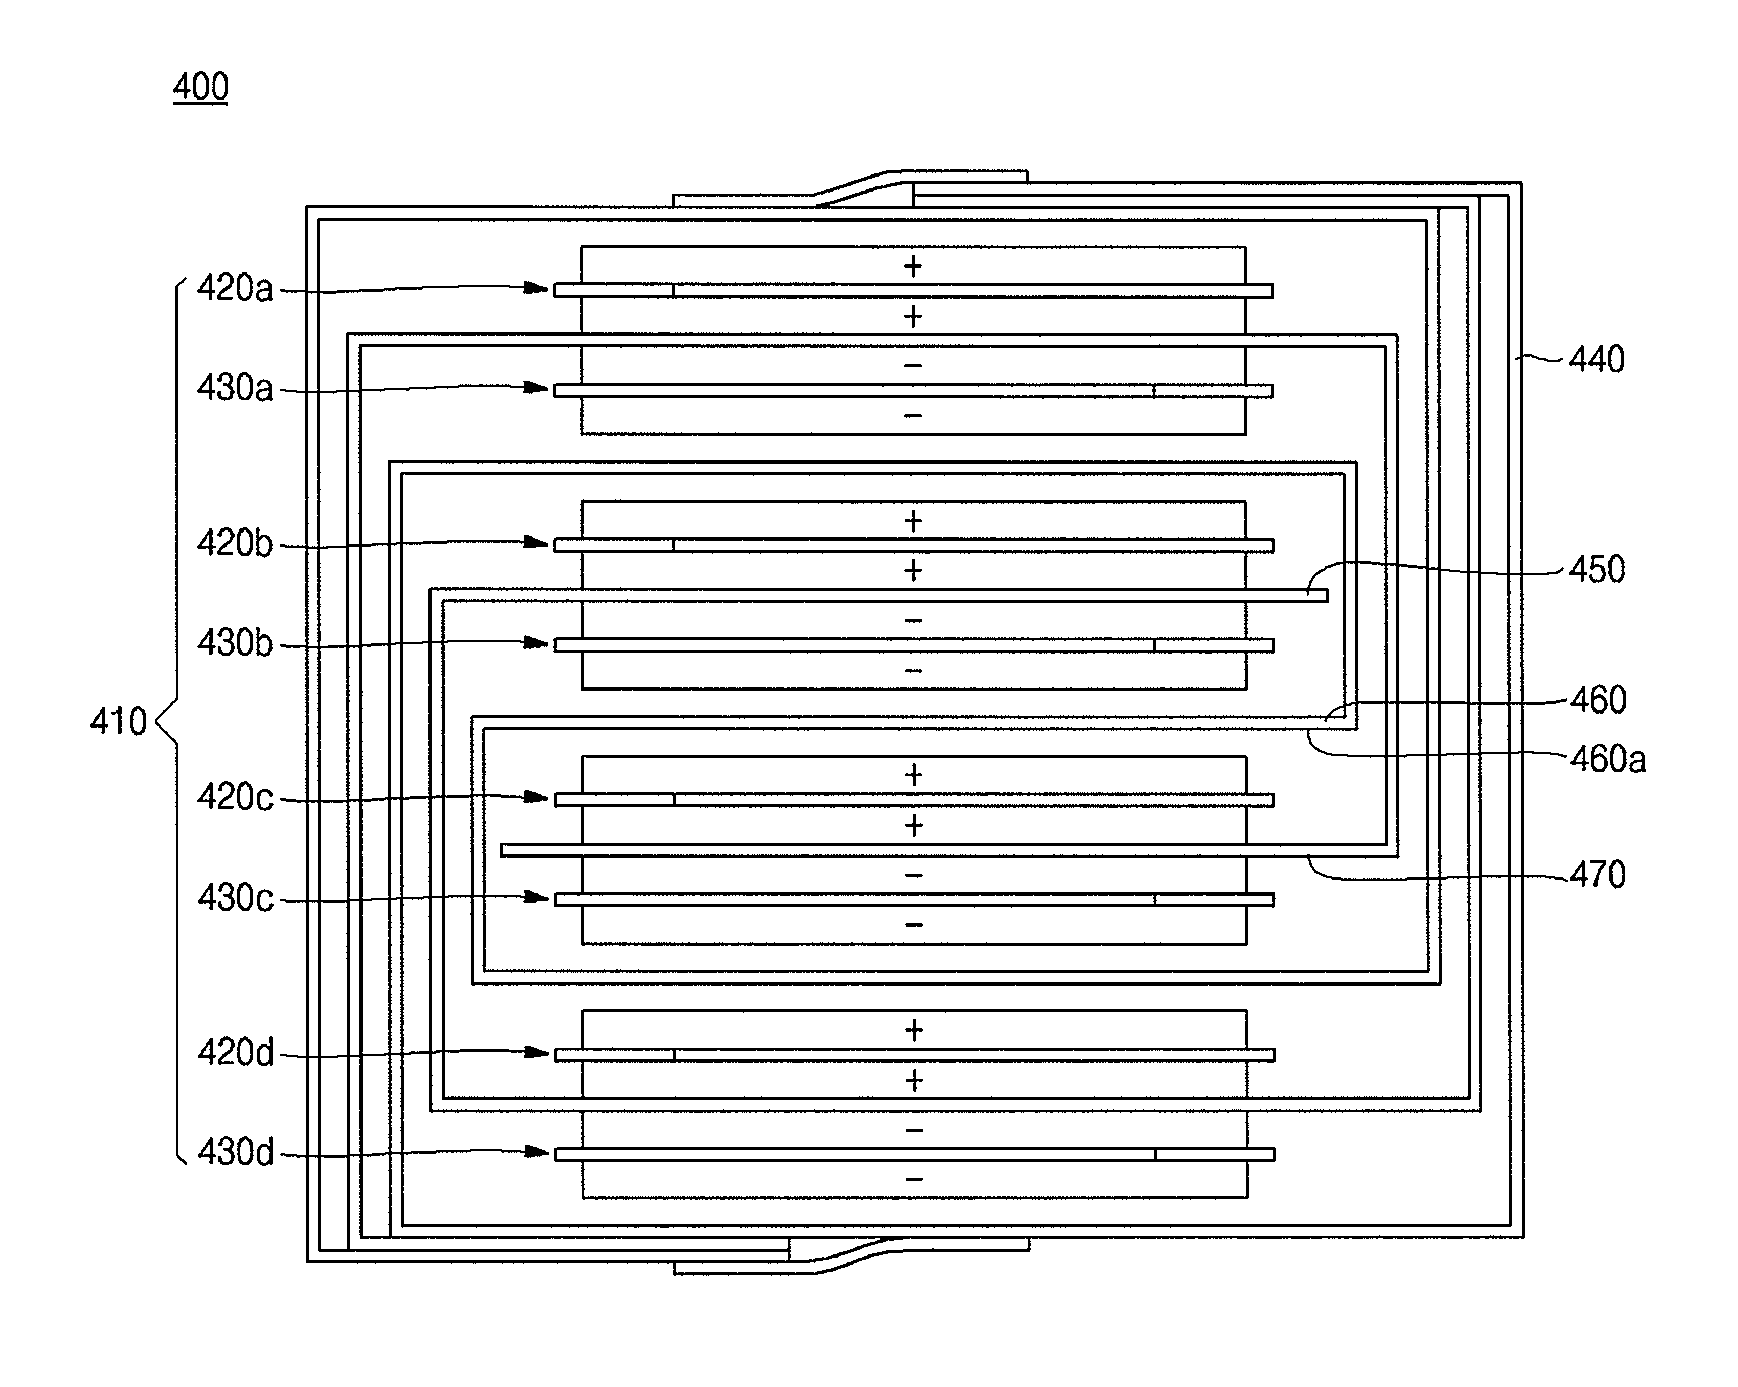 Electrode assembly with multiple separators wound about a winding center